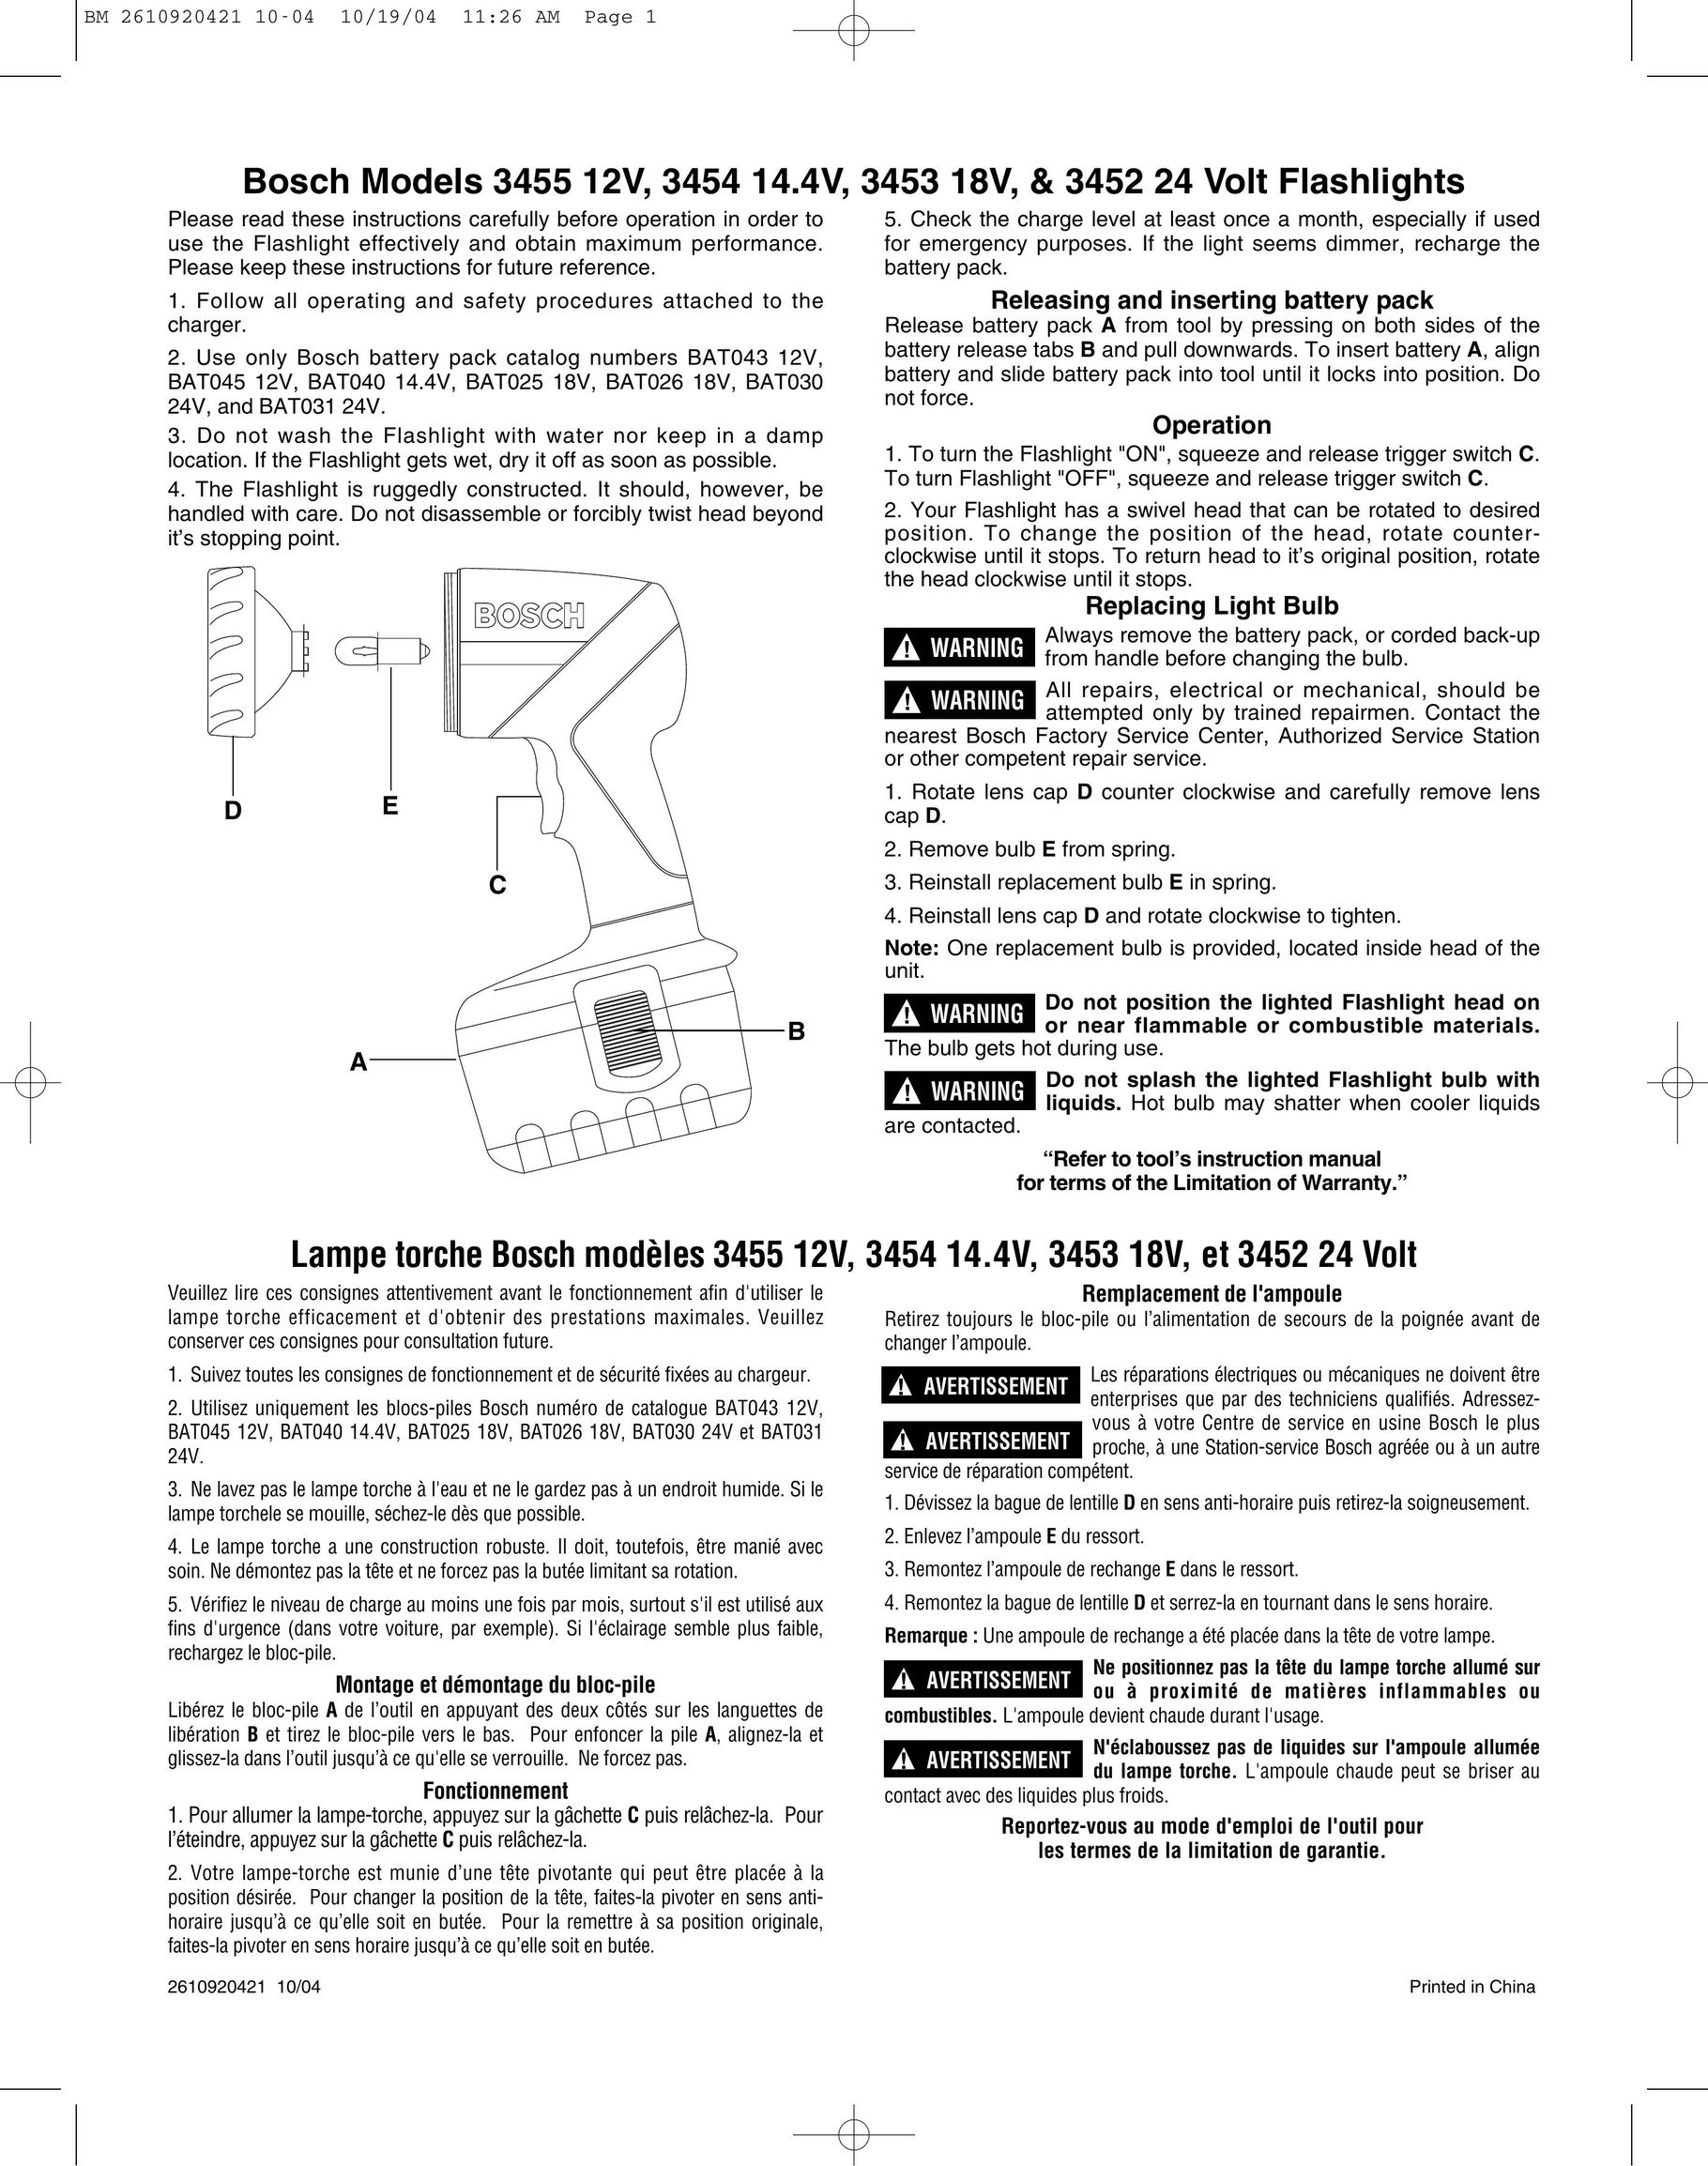 Bosch Appliances 3455-01 Home Safety Product User Manual